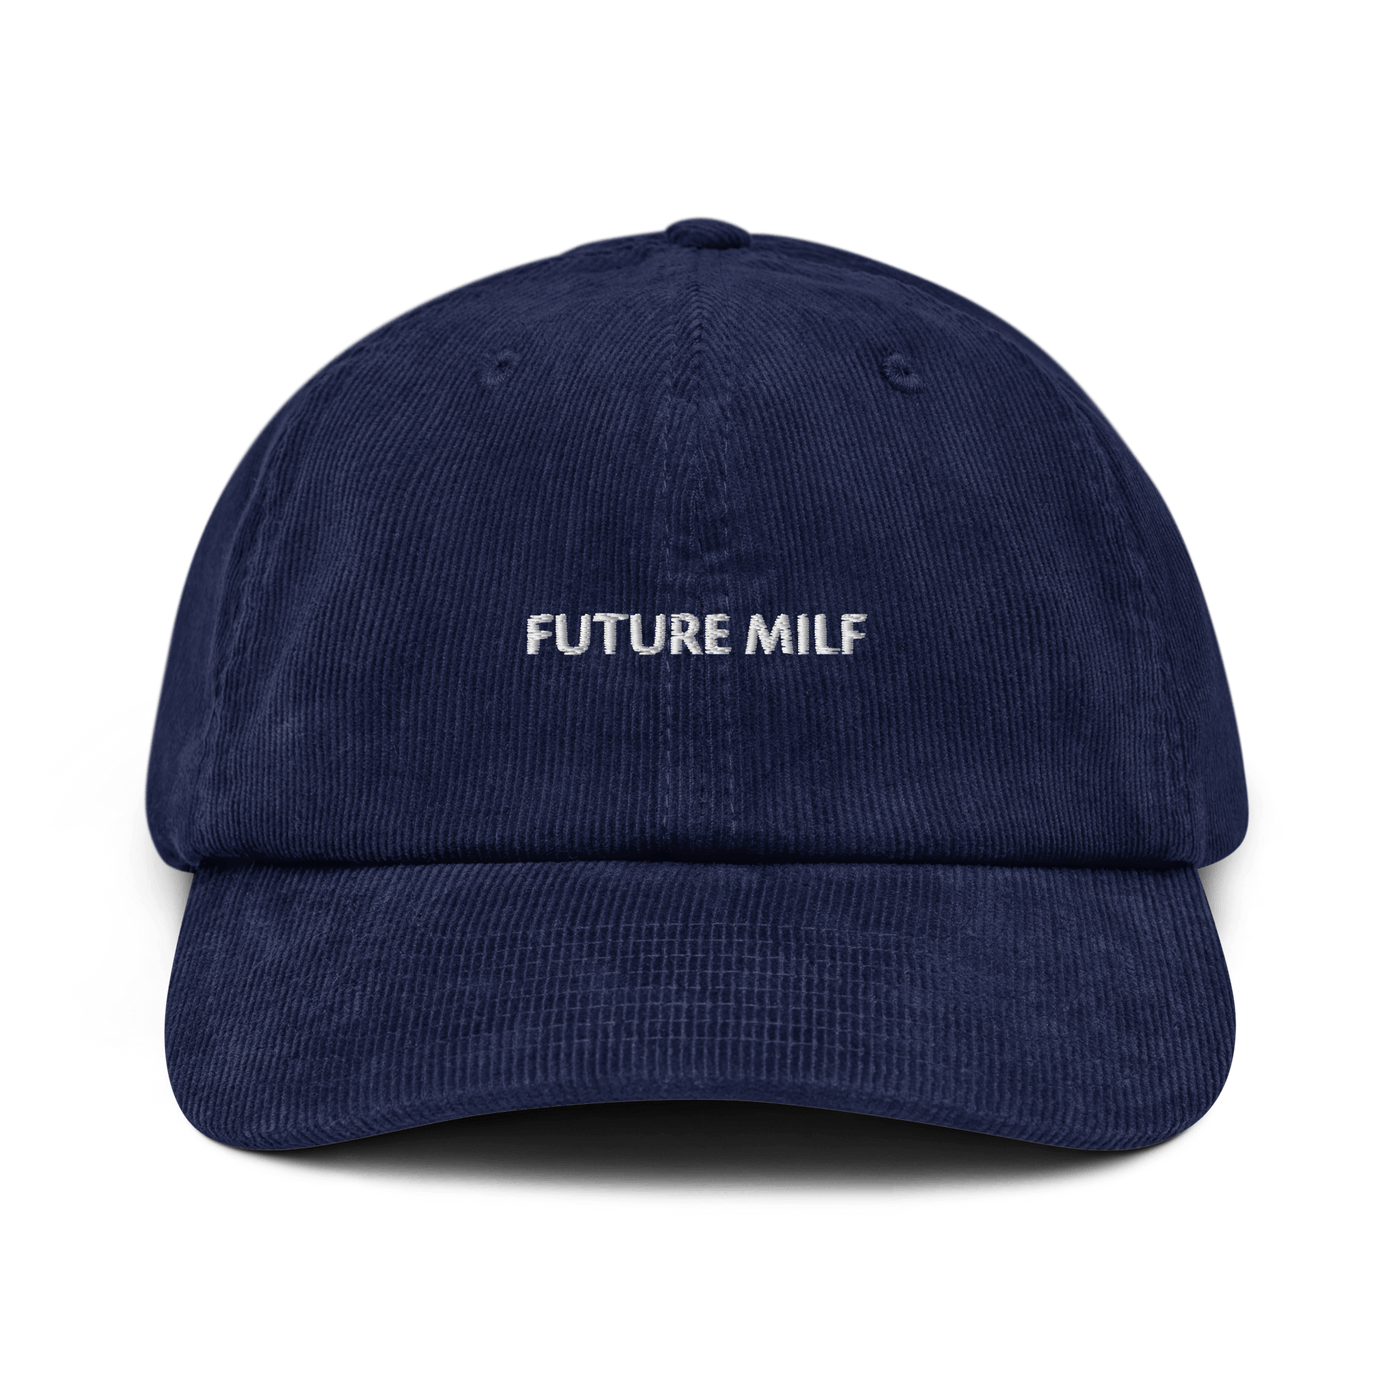 Future Milf Corduroy hat - Oxford Navy - - Just Another Cap Store